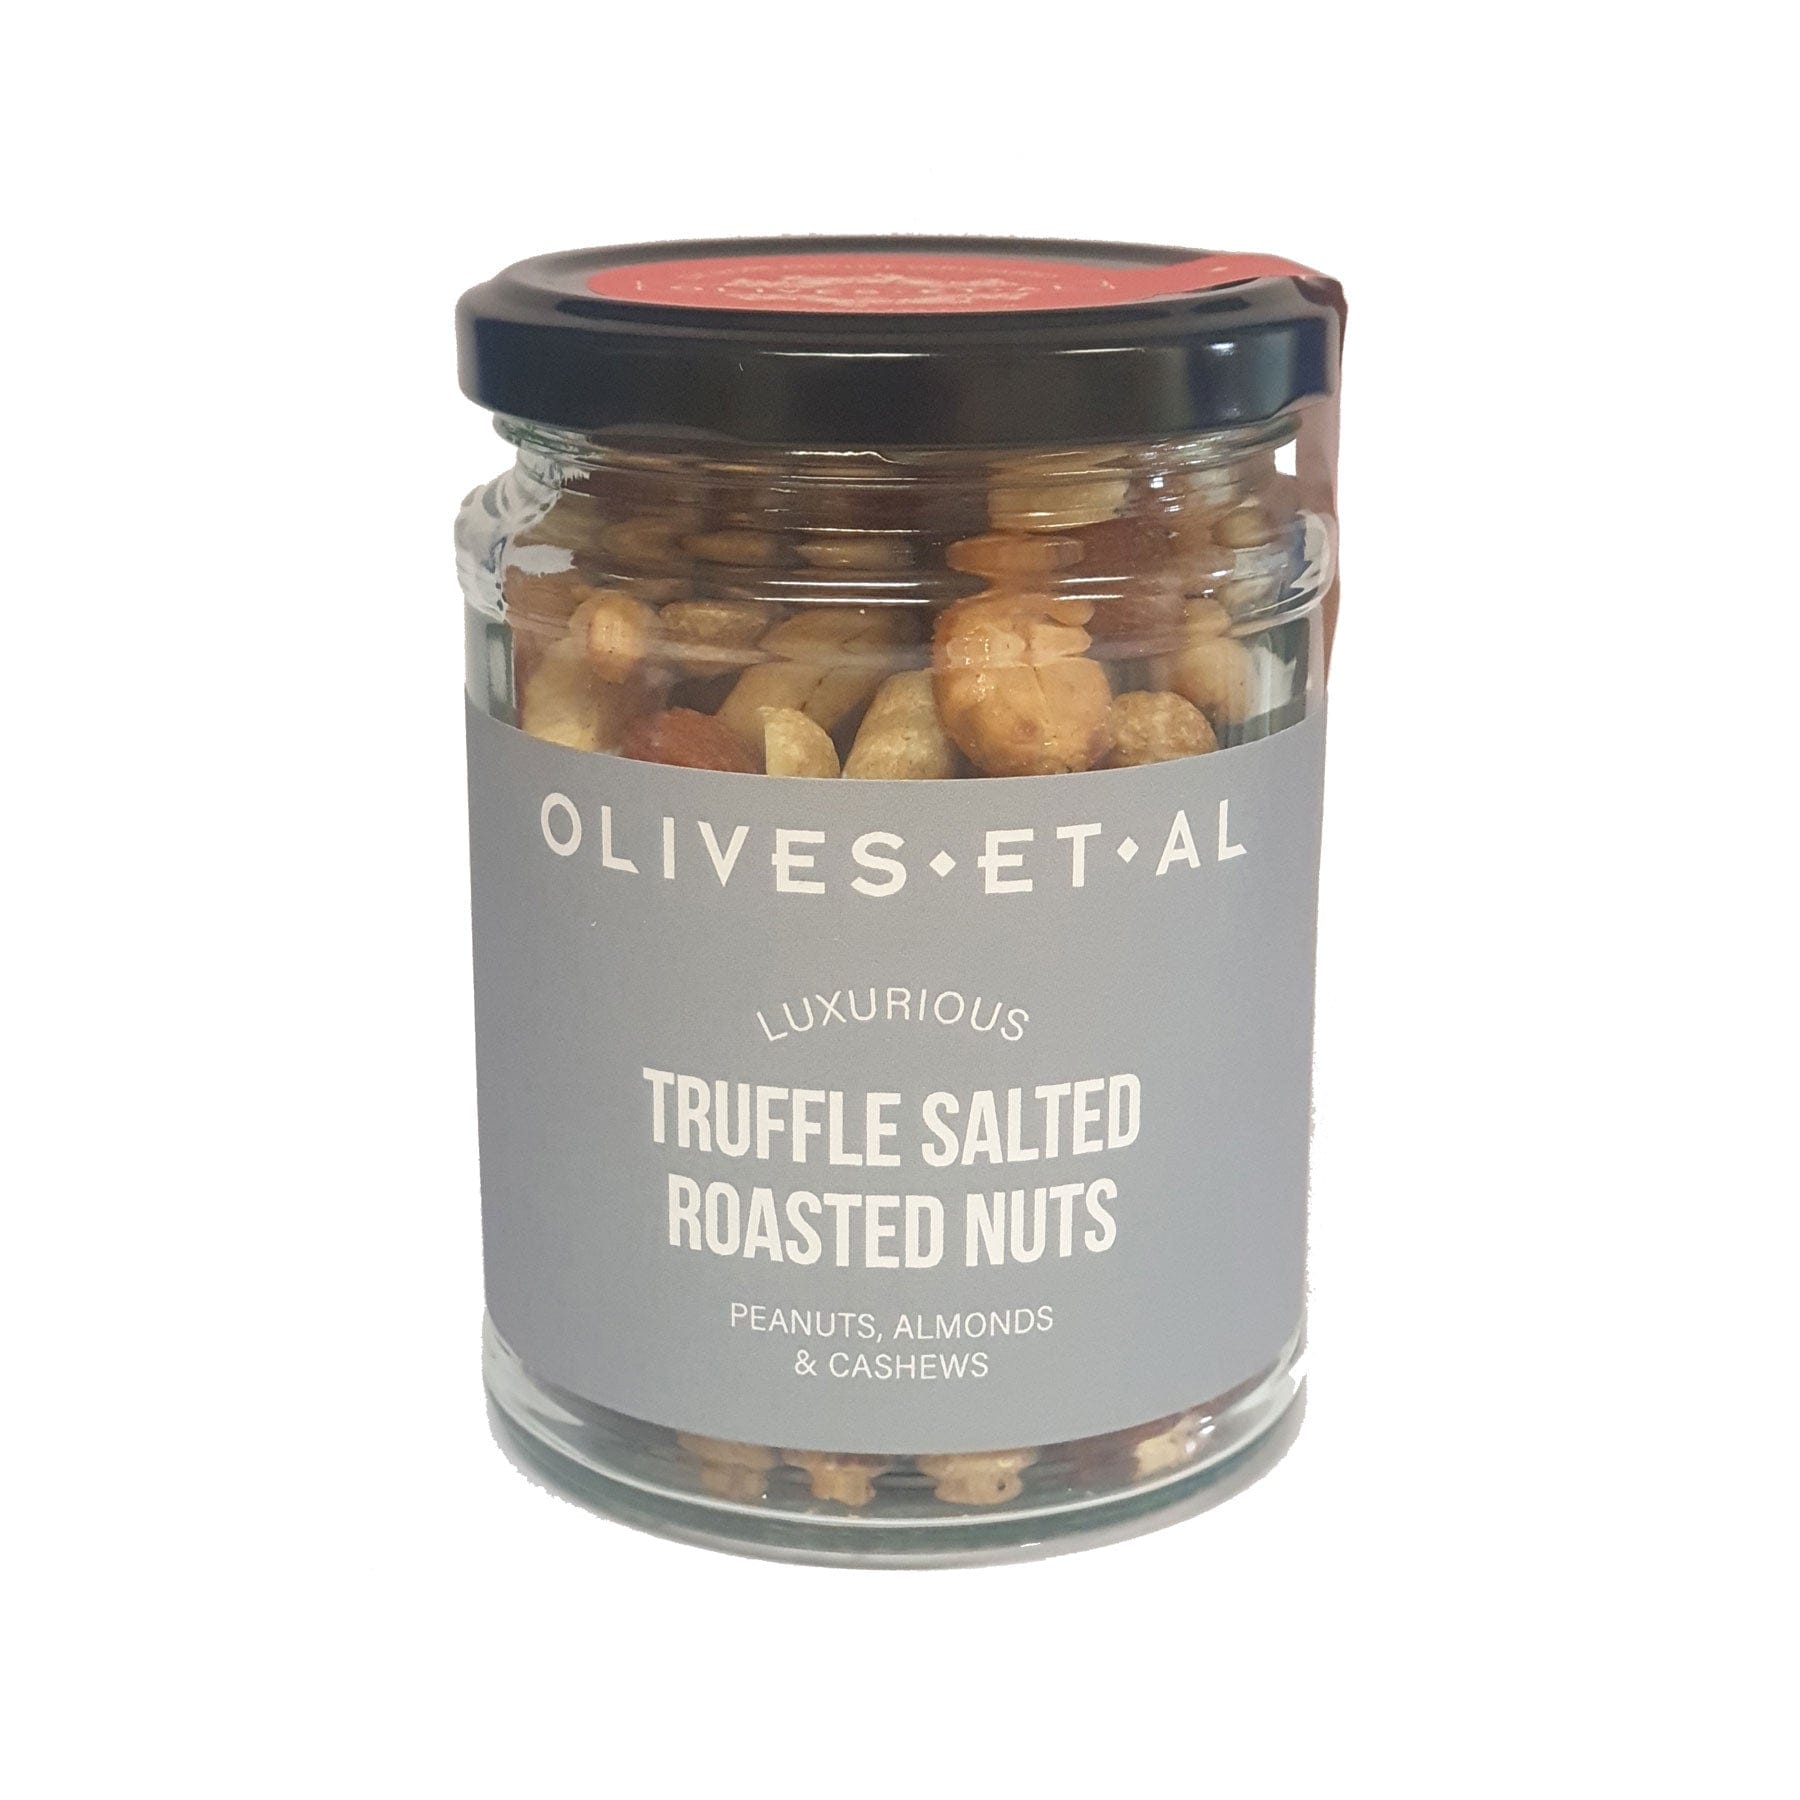 Truffle salted roasted nuts 150g